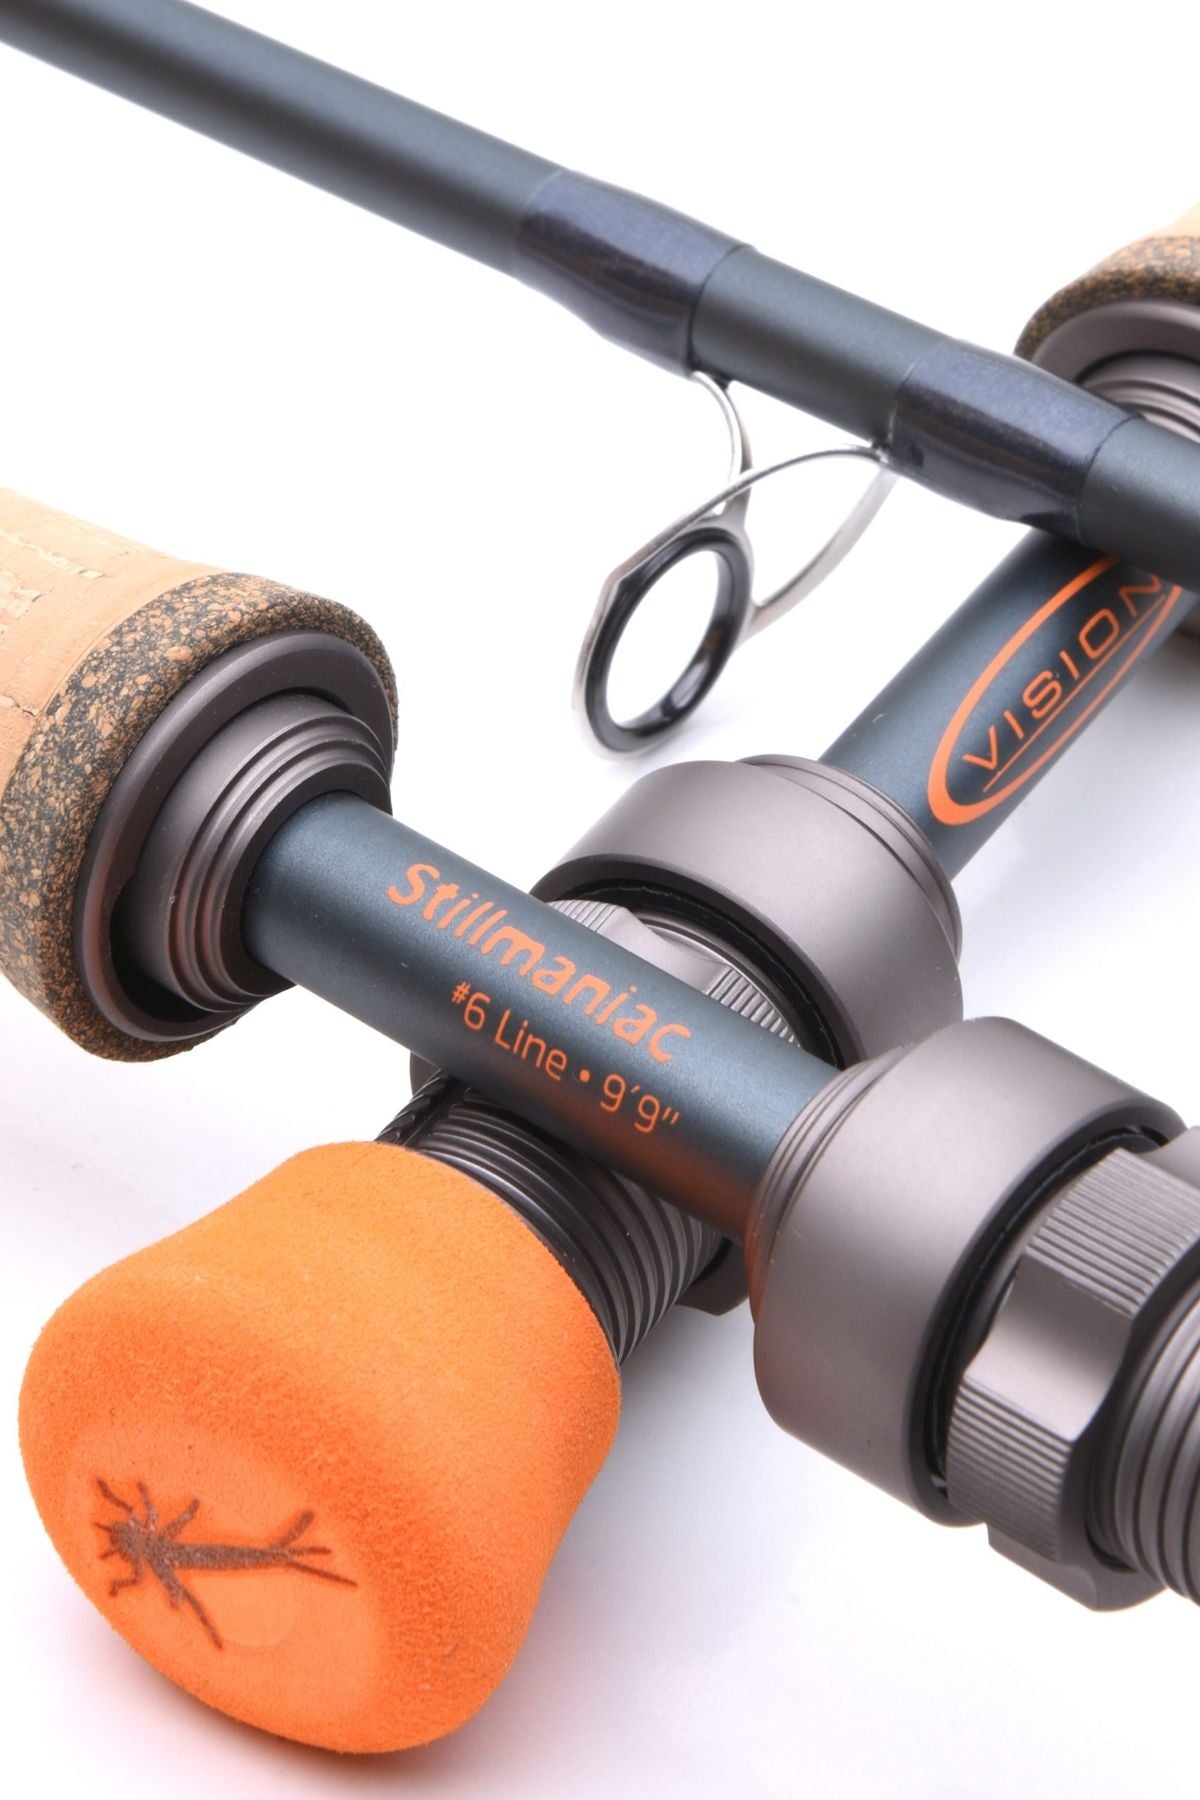 VISION STILLMANIAC FLY RODS - SAVE £100 OFF RRP! — Rod And Tackle